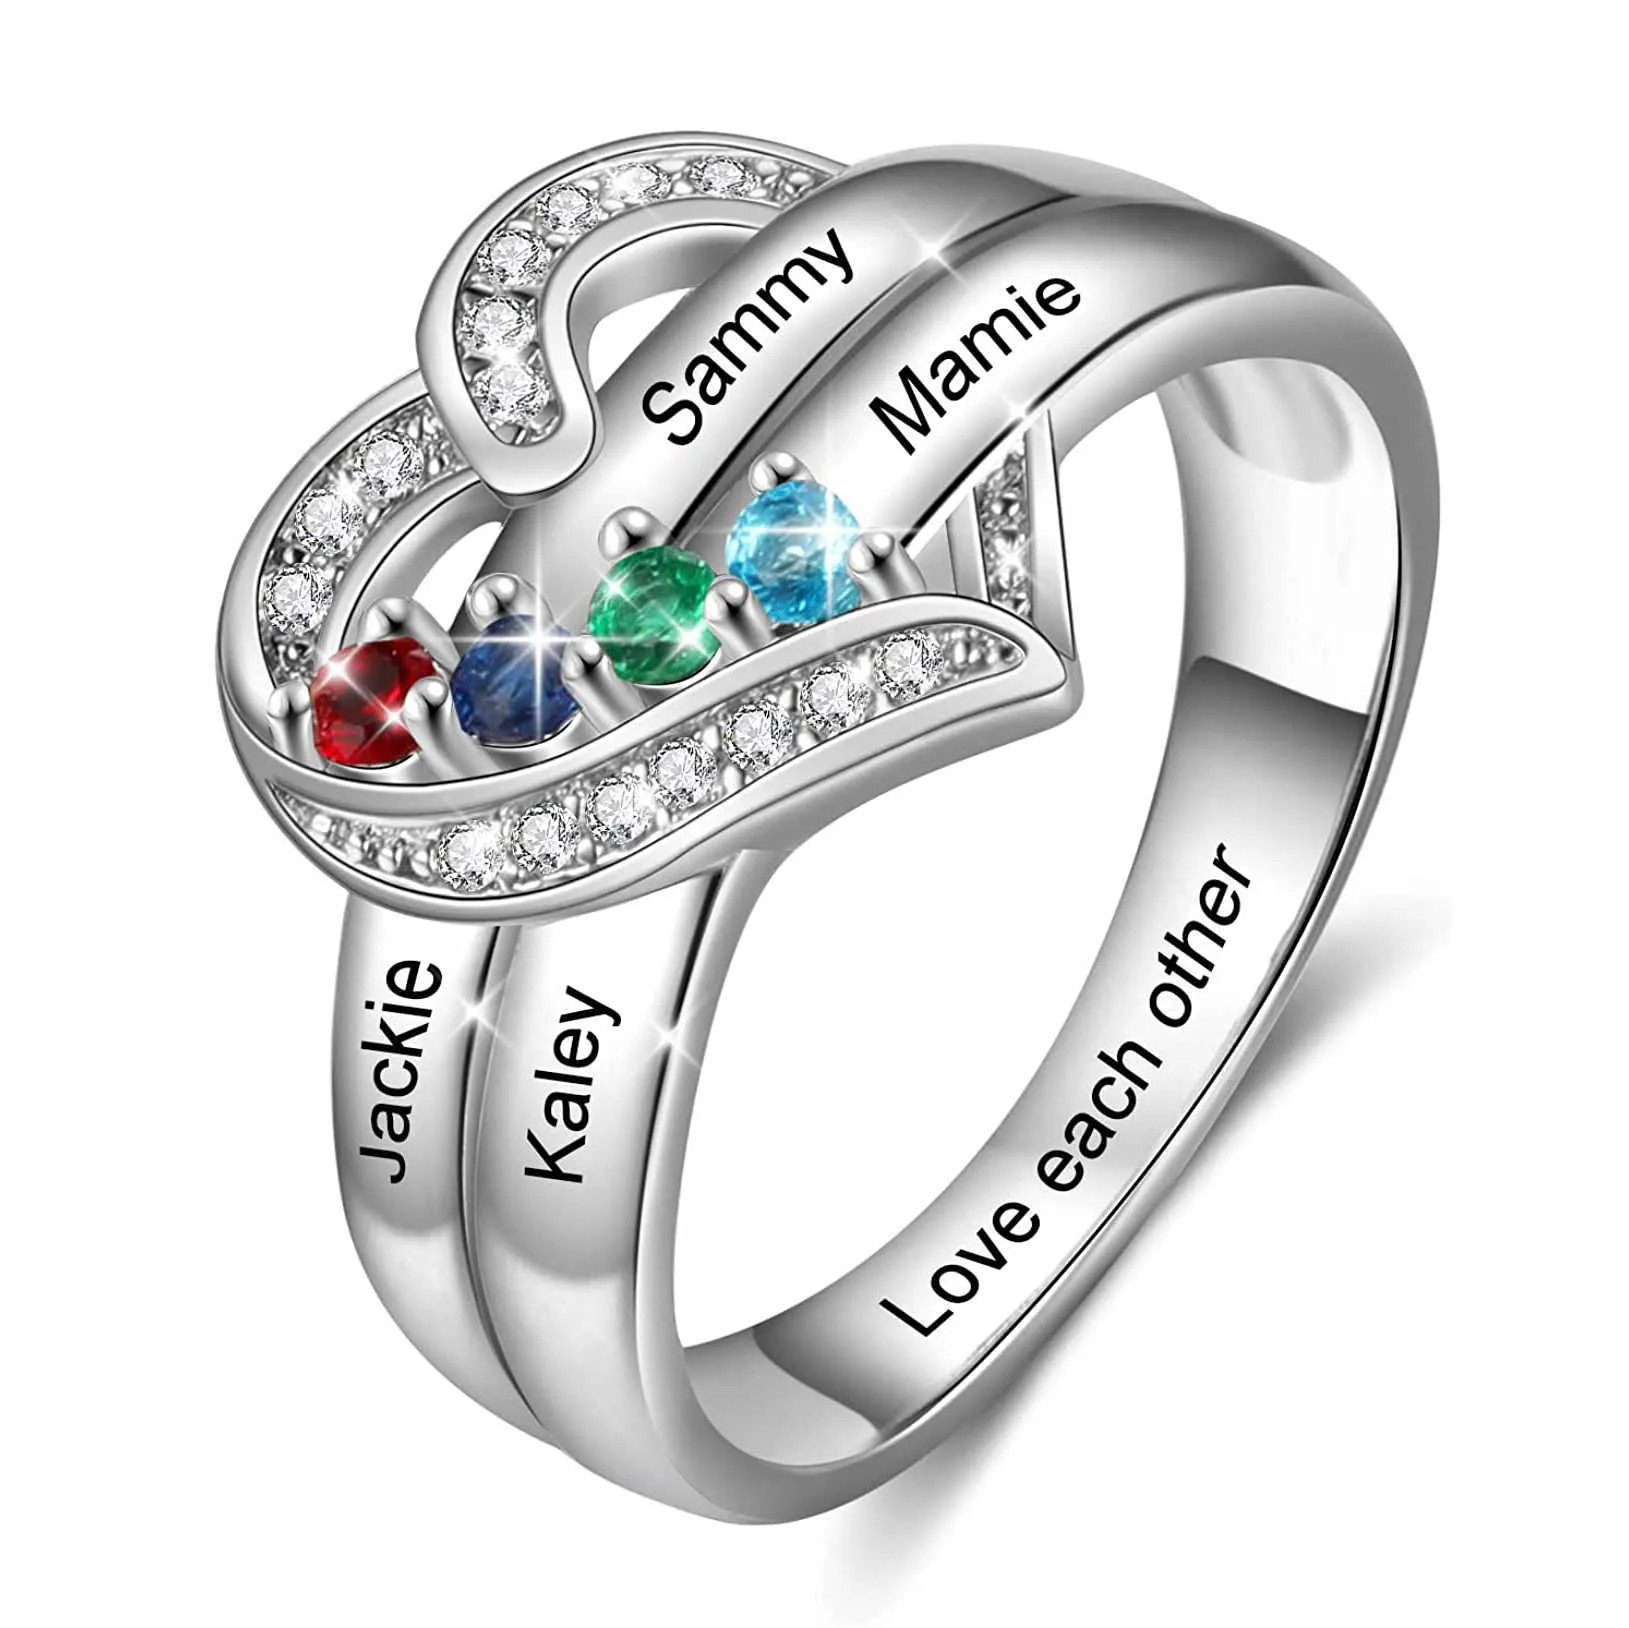 Solitaire Ring Personalized 1-8 Birthstone Rings Silver Heart Custom Engraved Name Family for Mother Days Aniversary Jewelry Y2303